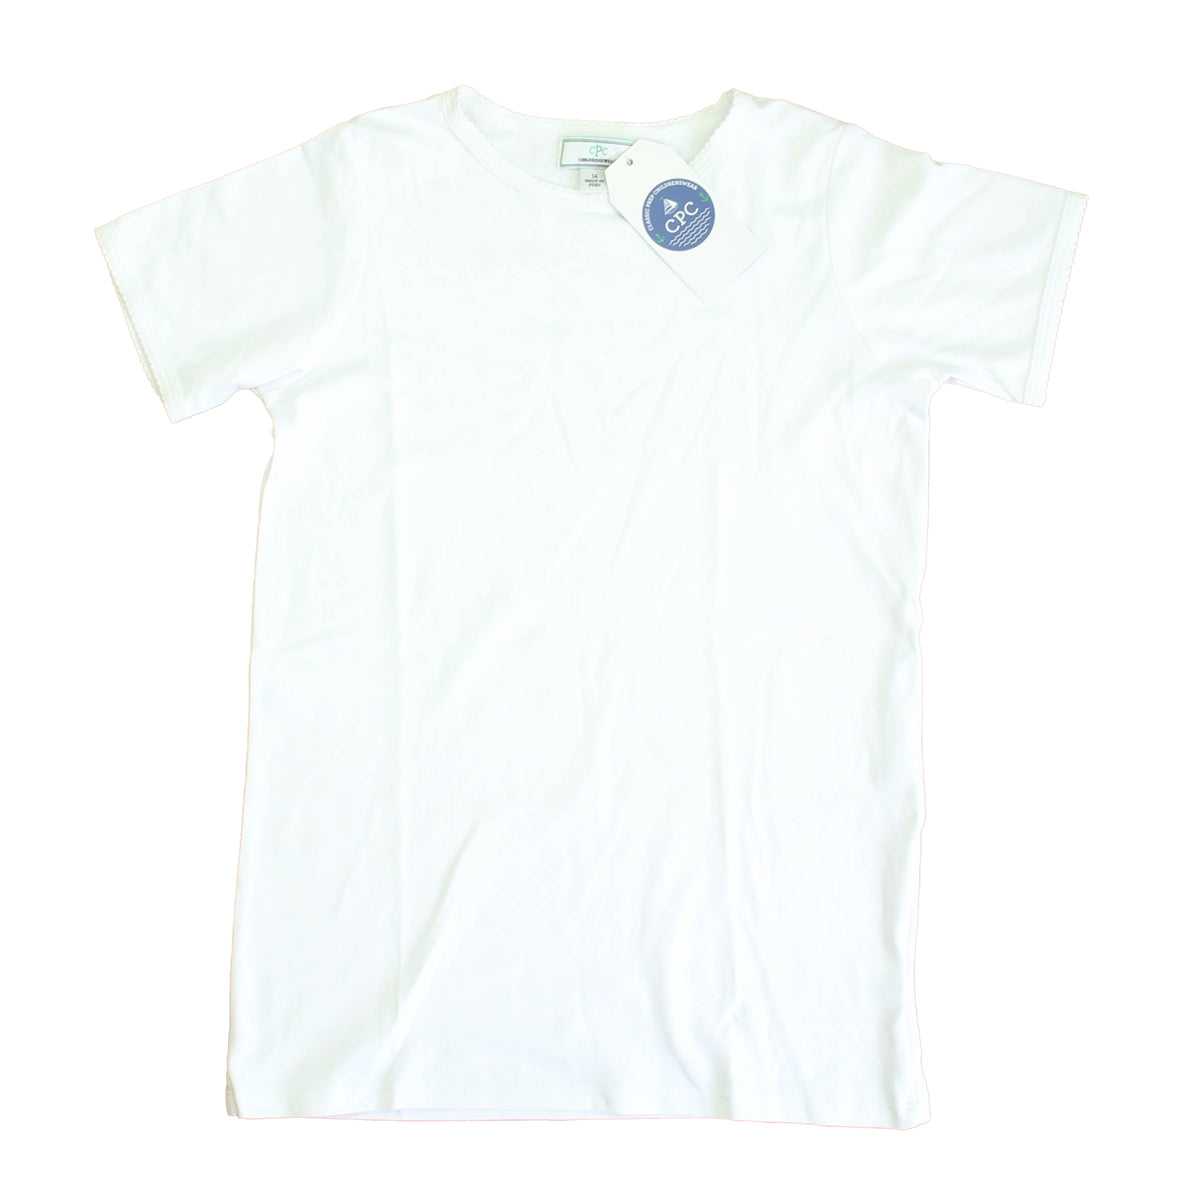 New with Tags: White T-Shirt -- FINAL SALE